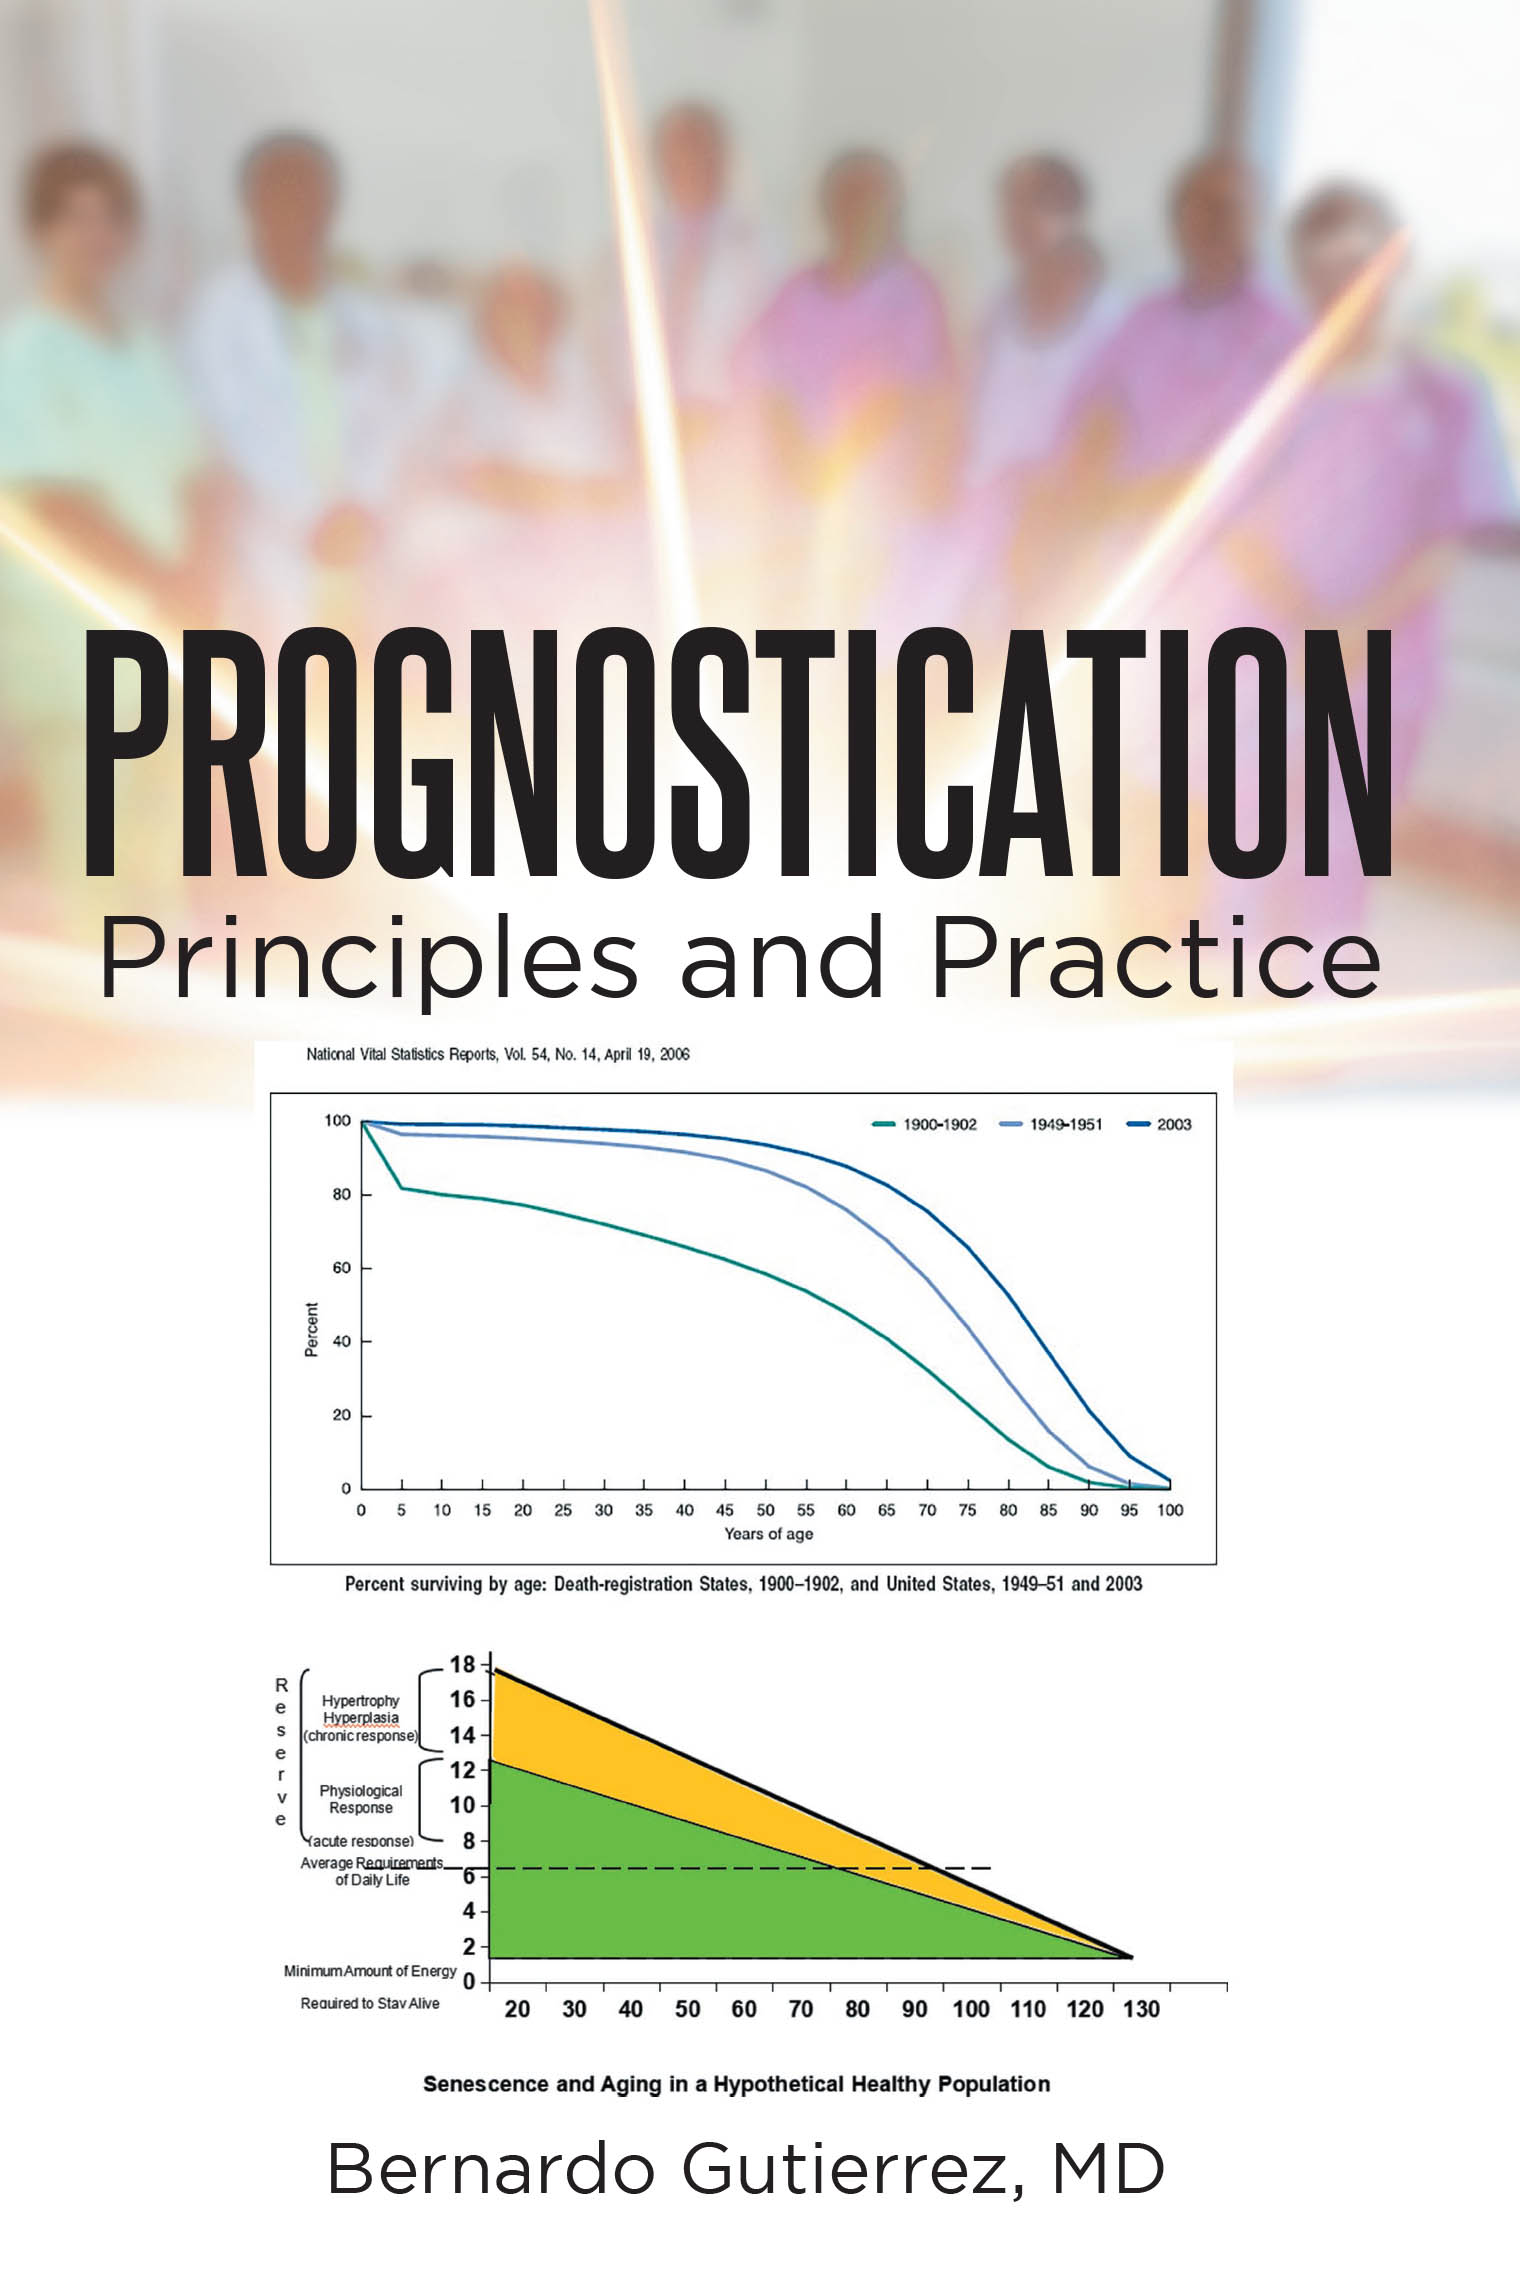 Author Bernardo Gutierrez MD’s New Book, "Prognostication: Principles and Practice," Offers a Thought-Provoking Discussion That Aims to Redefine Patient Care